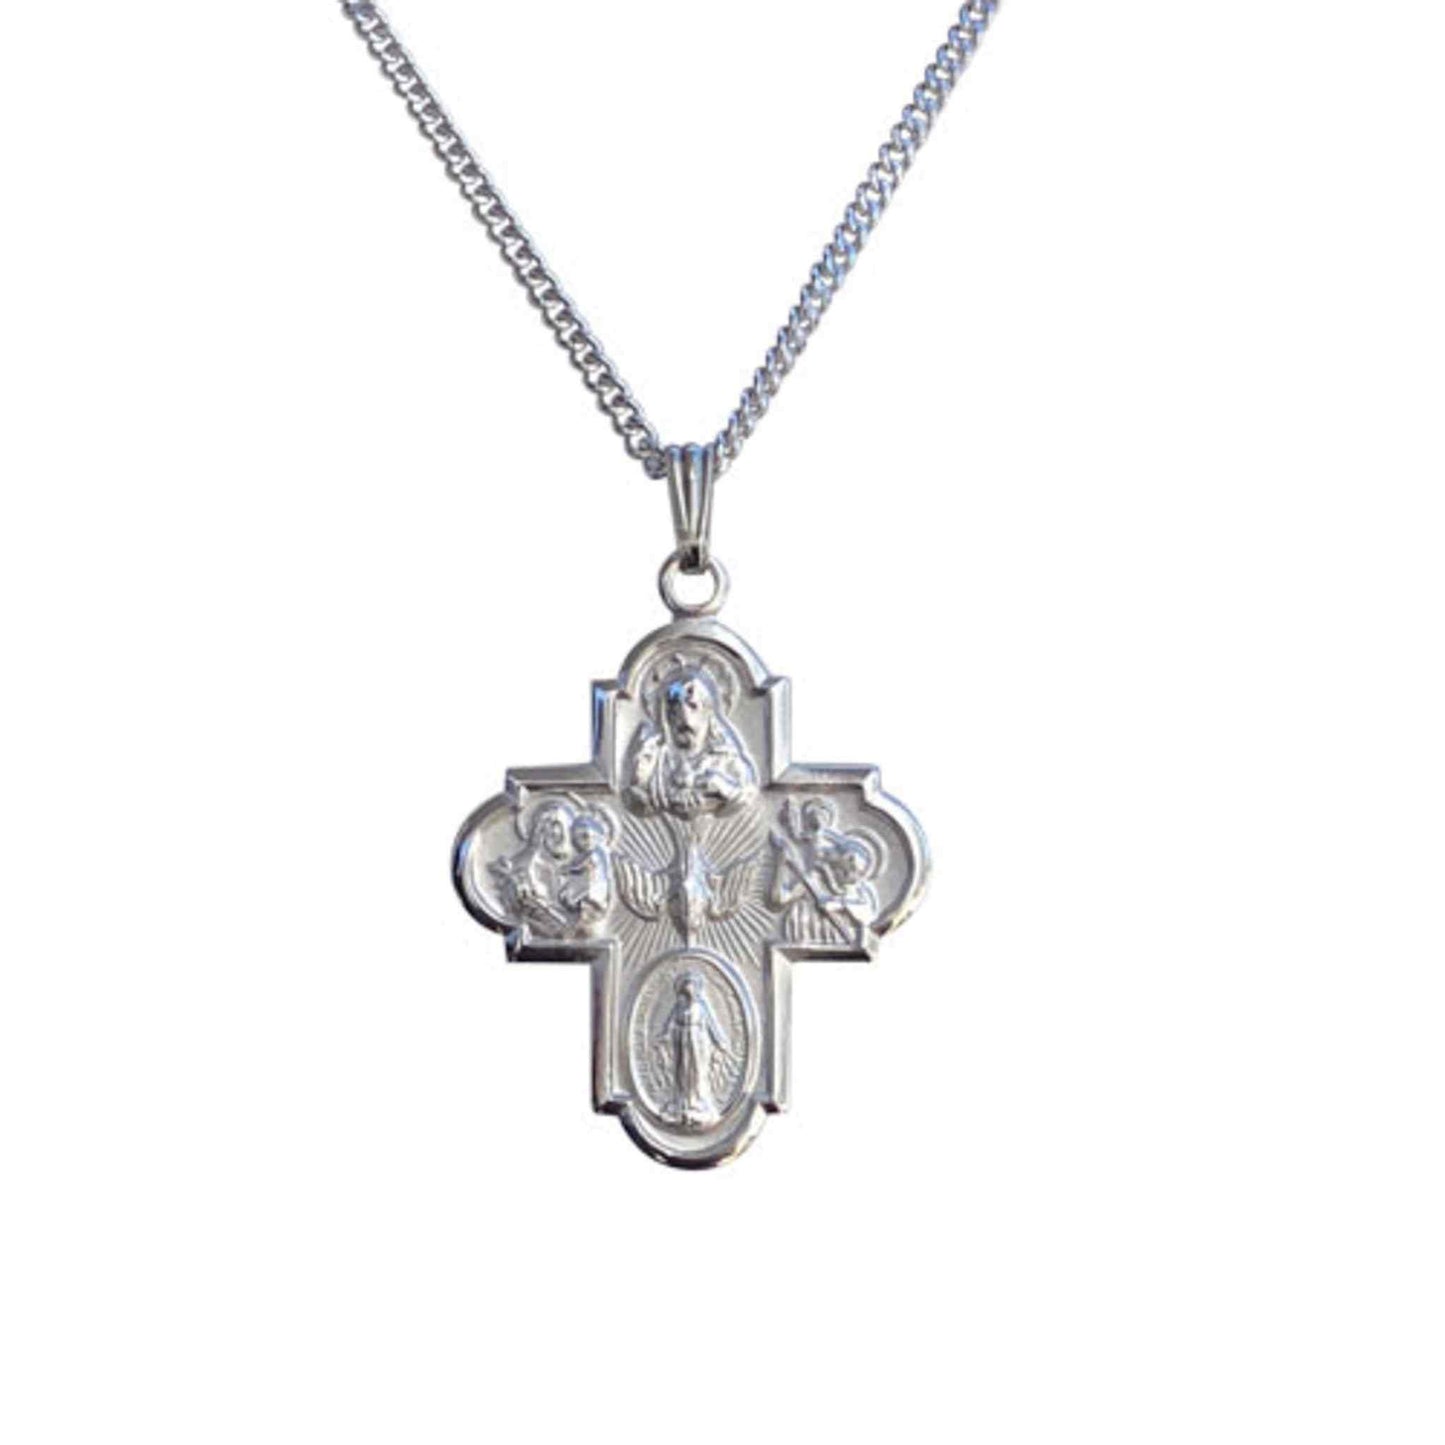 A five way cross necklace displayed on a neutral white background.